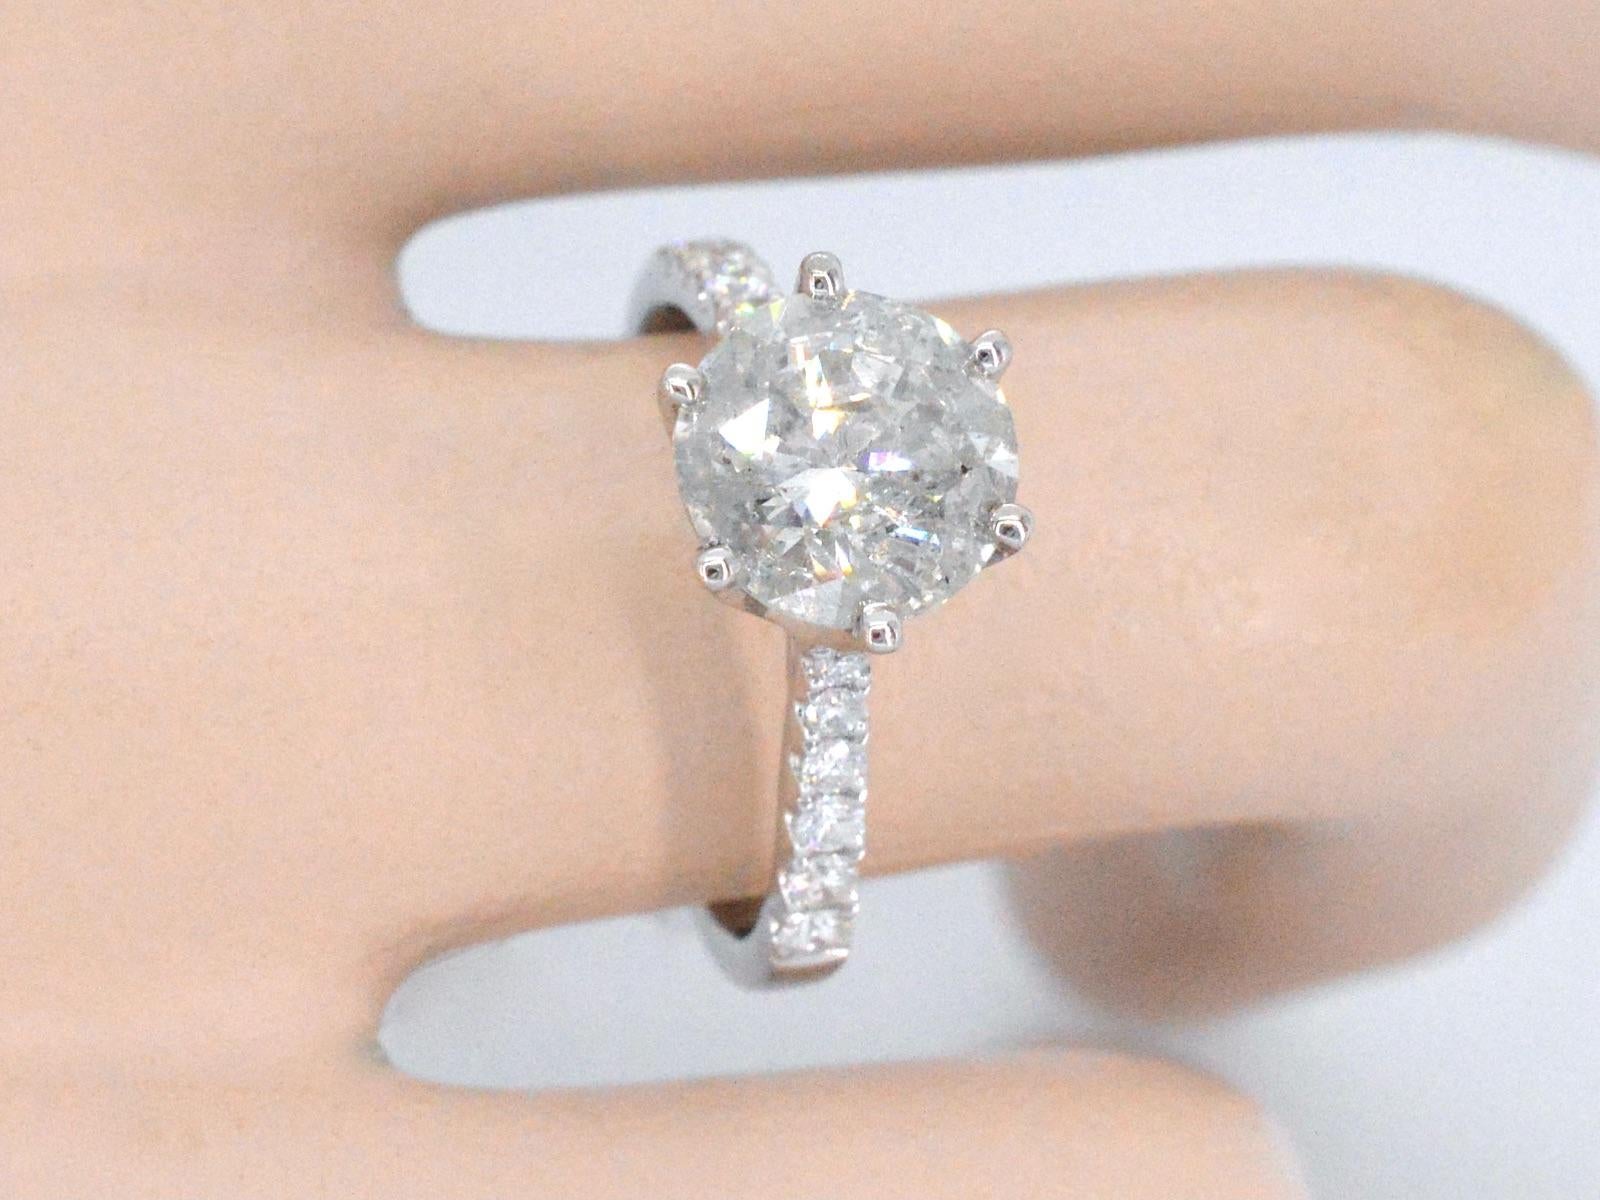 This is a stunning new diamond ring with a 3.00 carat natural center stone and 12 additional diamonds weighing a total of 0.50 carats. The center stone is of excellent quality, with a brilliant cut, D-E color, and P clarity, and the 12 smaller